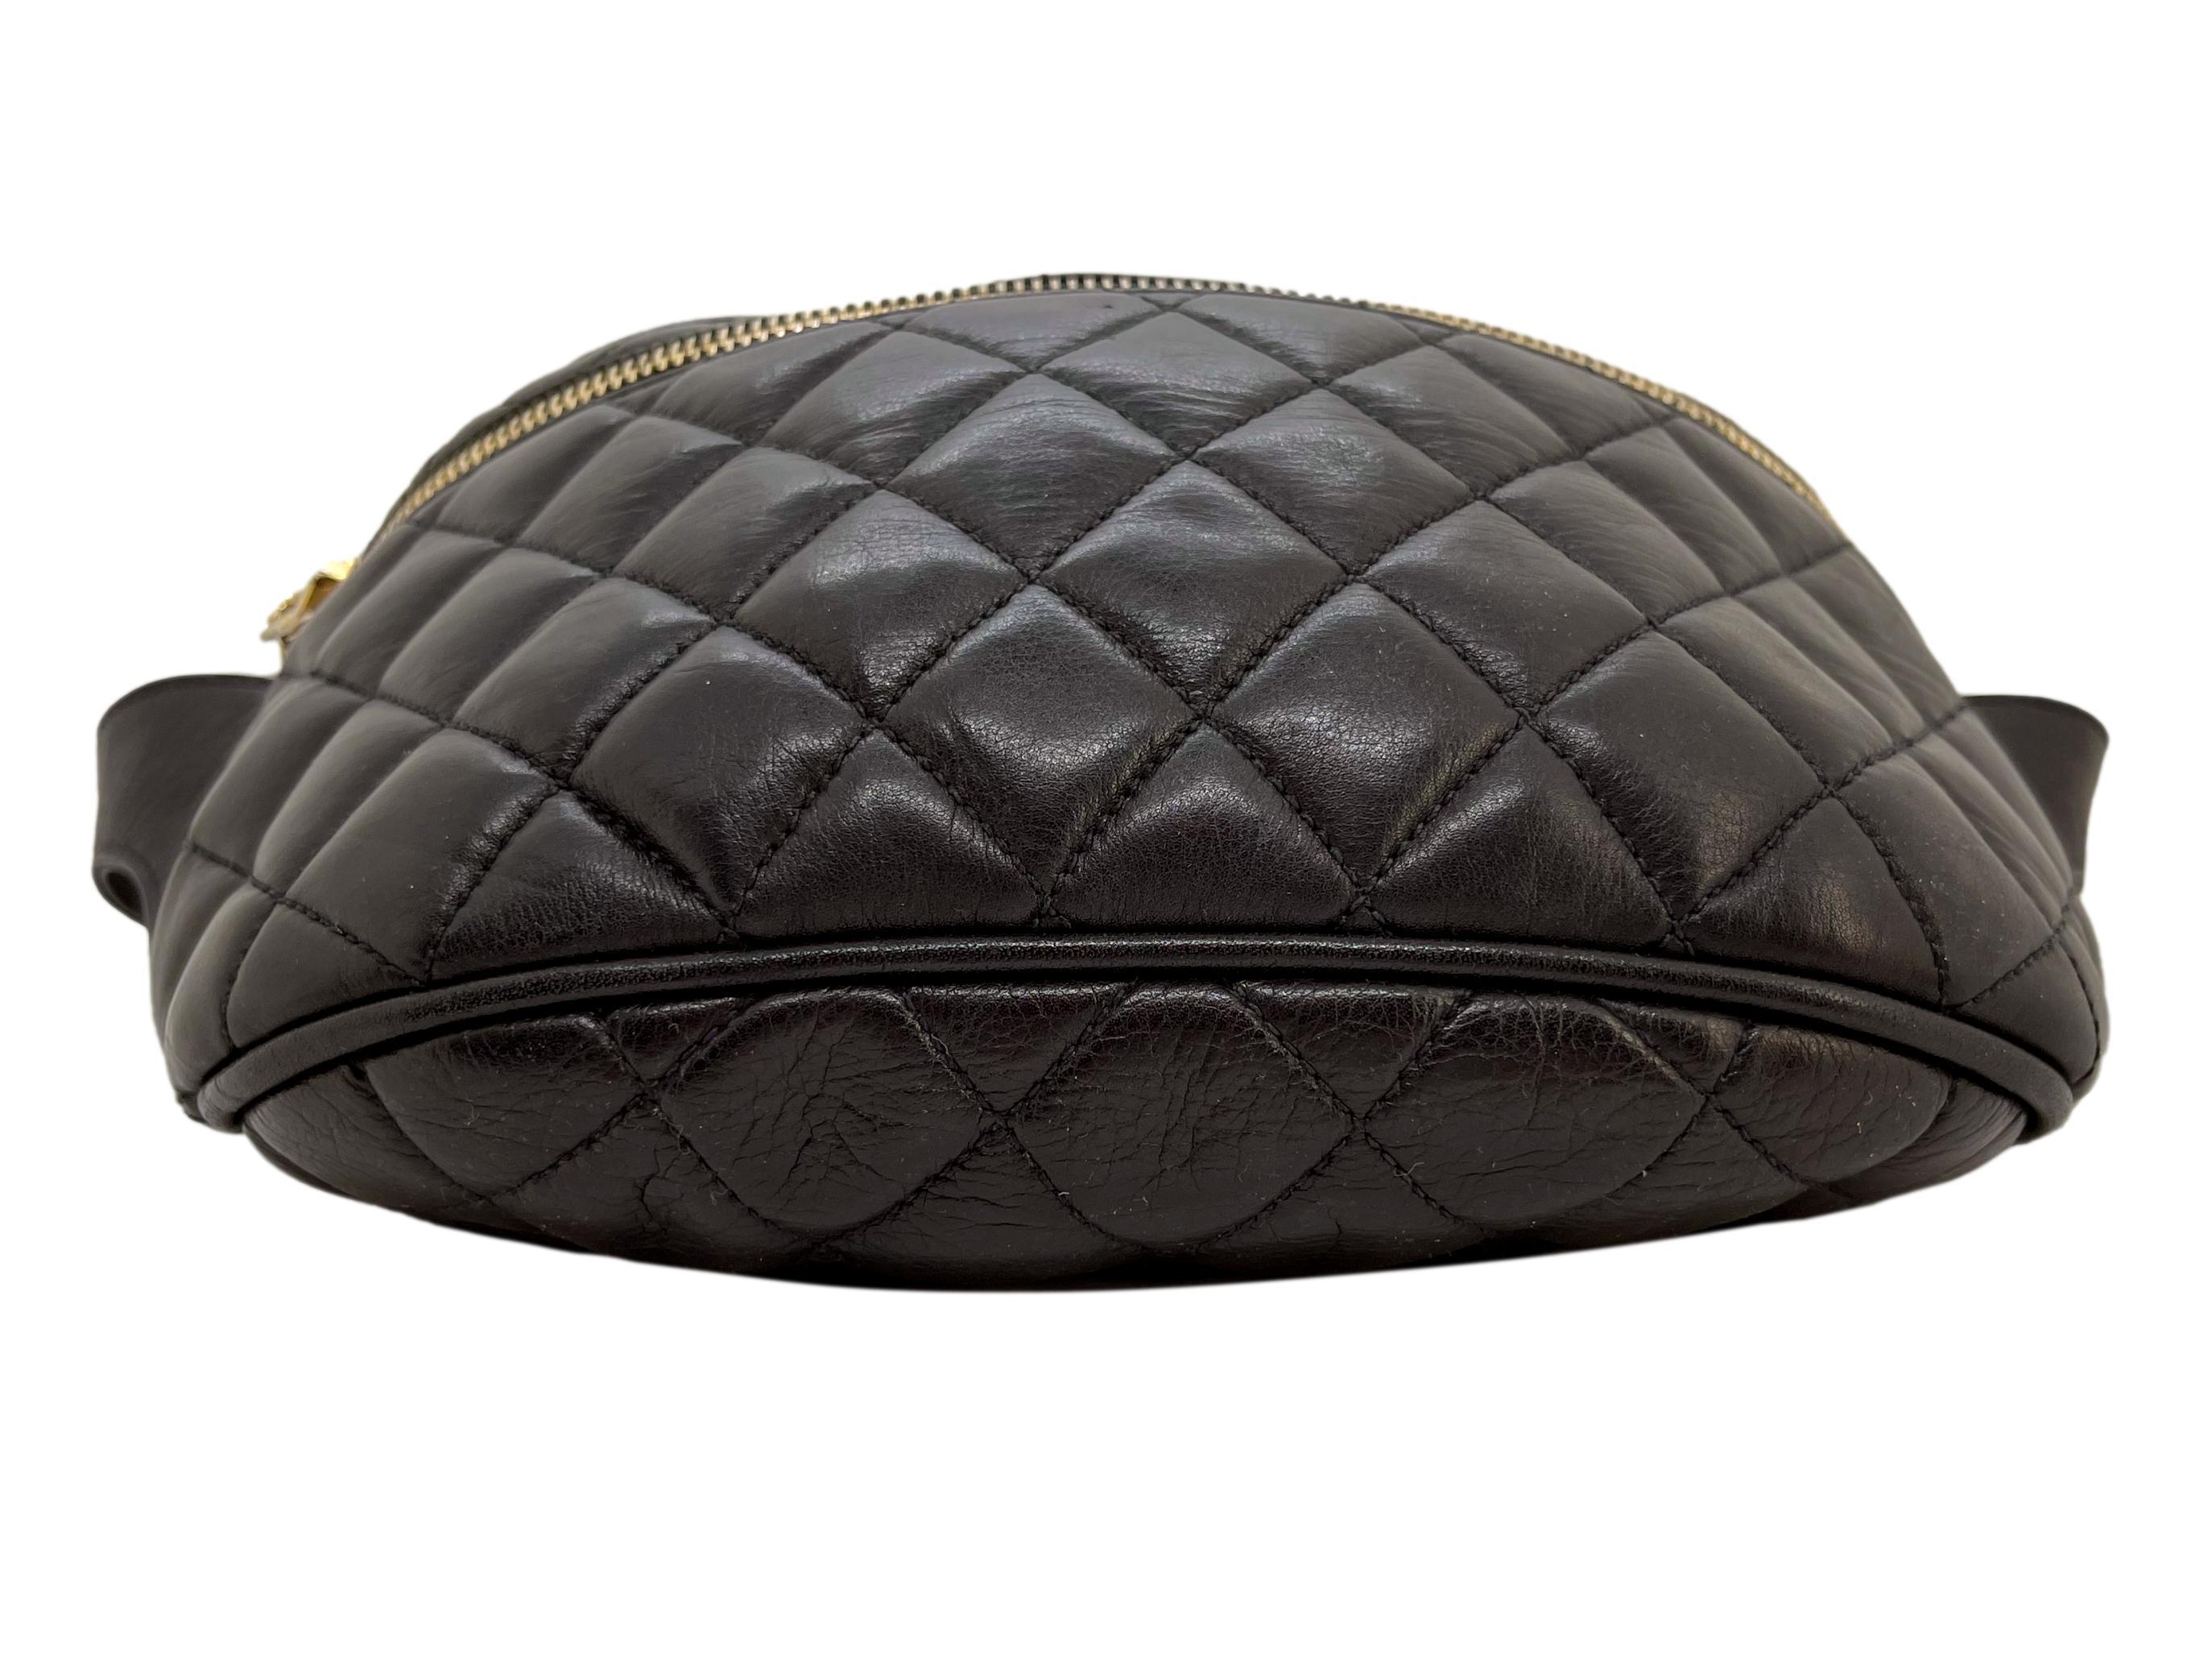 Chanel Quilted Lambskin Waist Belt Bum Bag with Gold Hardware, 1985. 3